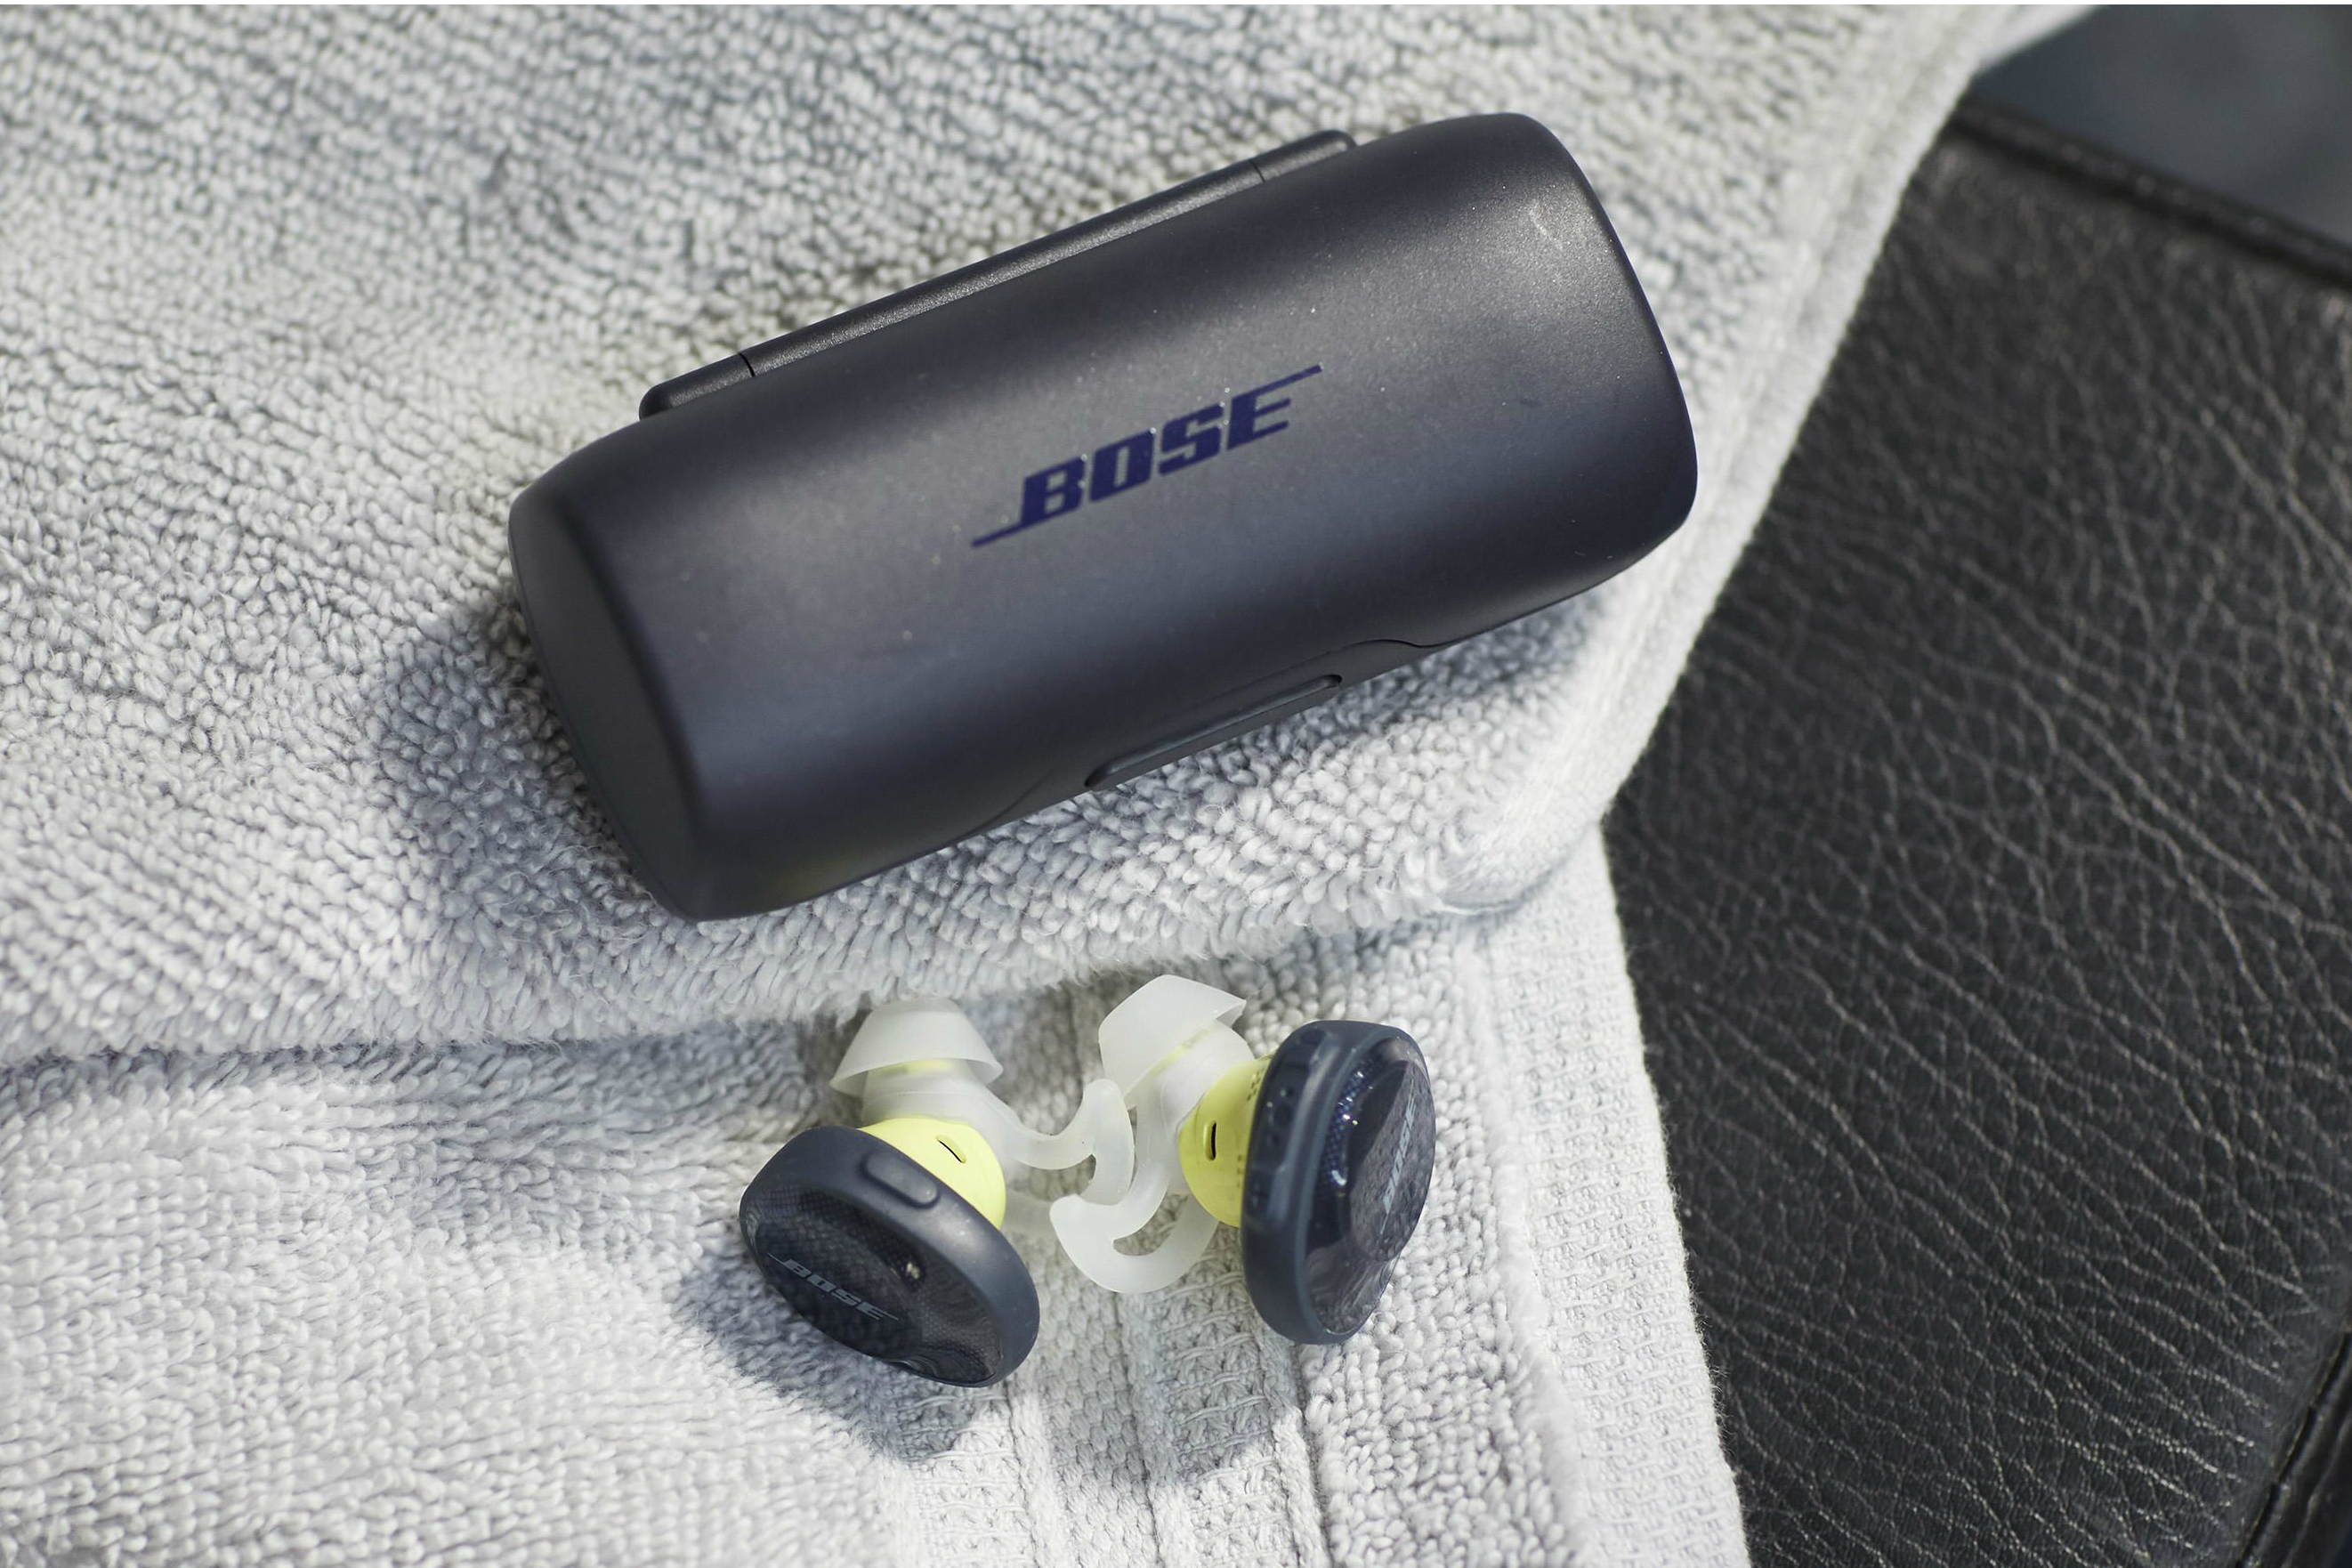 Snag Bose SoundSport Free Wireless for 30% off on Prime Day | Trends